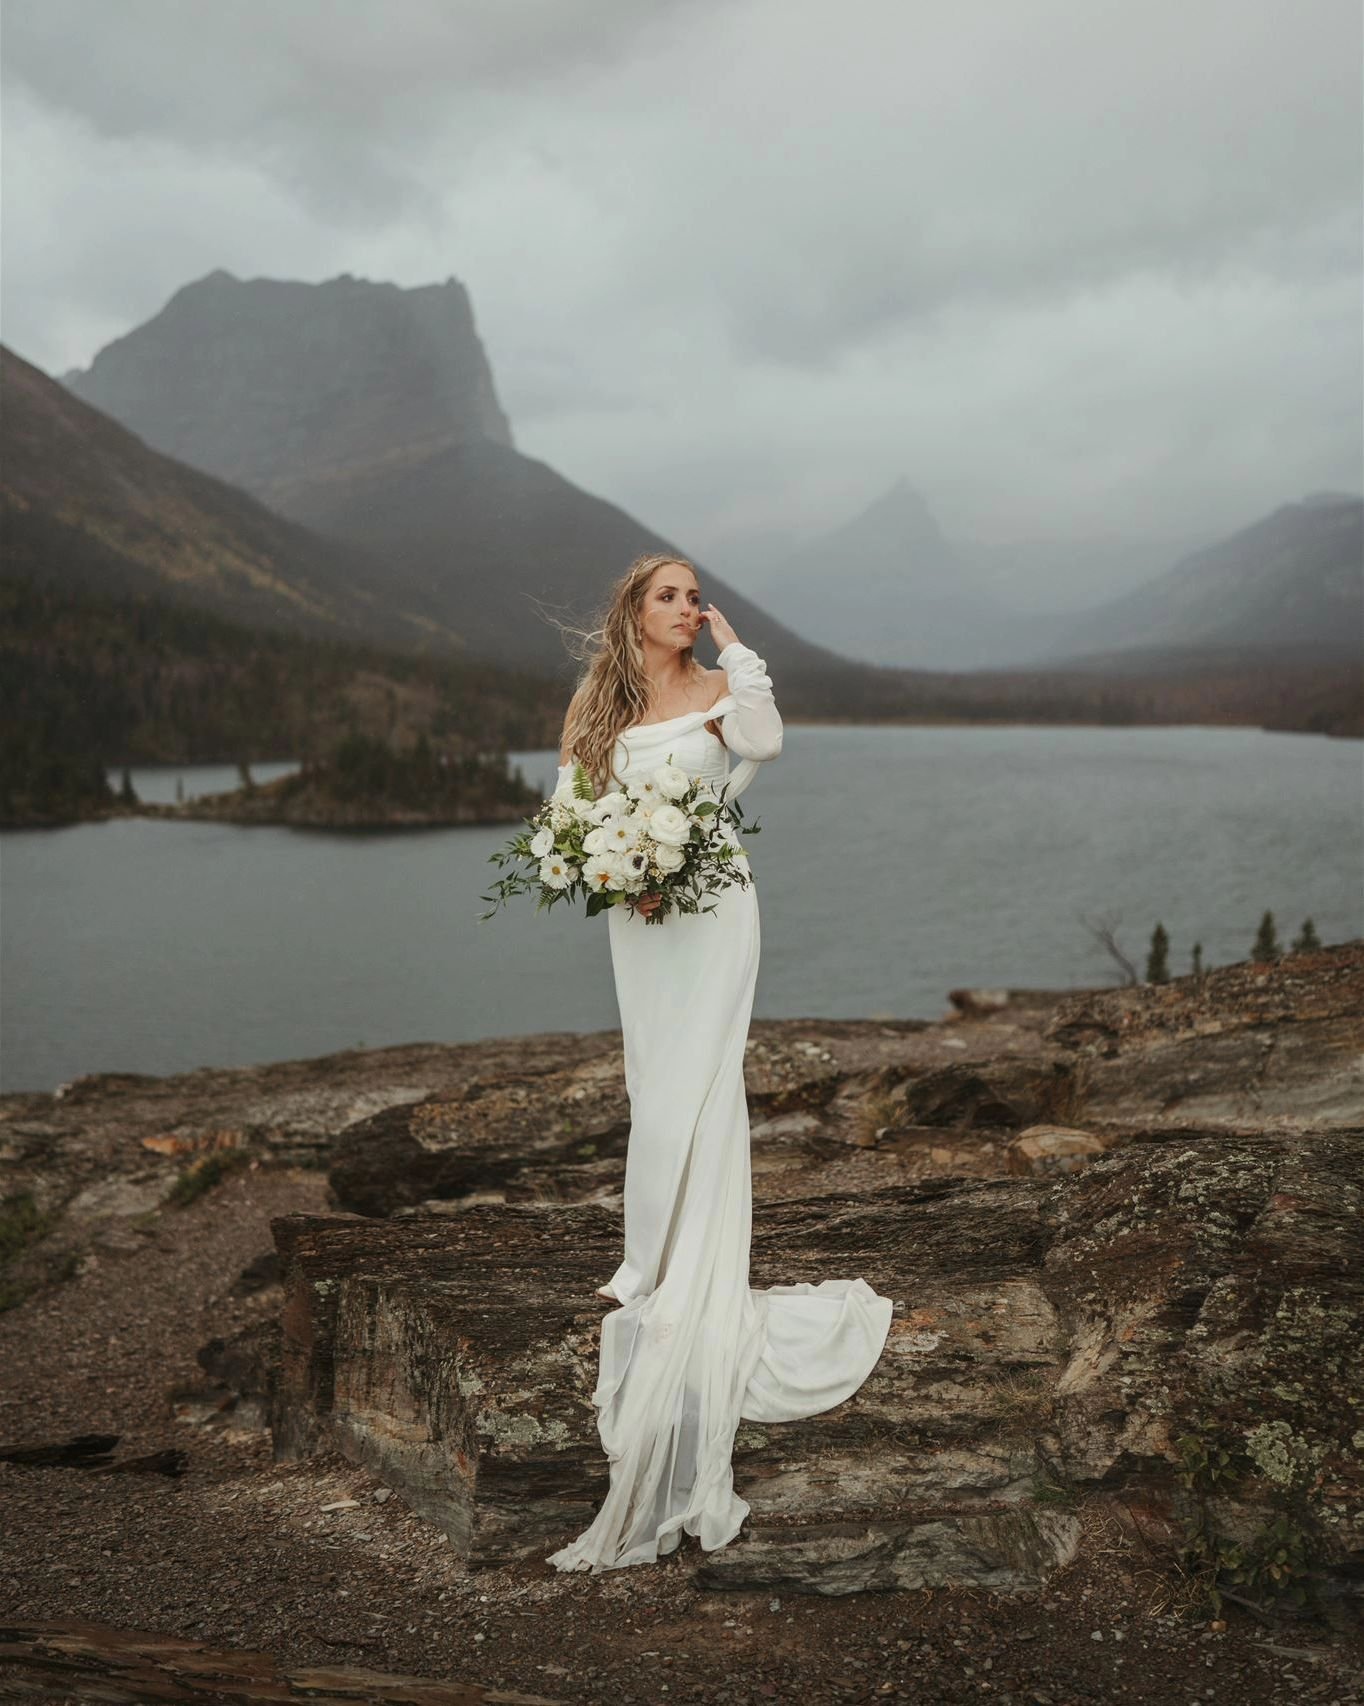 we love editorial-esque elopement photos 🩶

honestly, we have a backlog of amazing elopement photos to share, but in true KFP fashion, I hold these moments sacred and really struggle with sharing them with the world (plz tell me I'm not alone)

But 